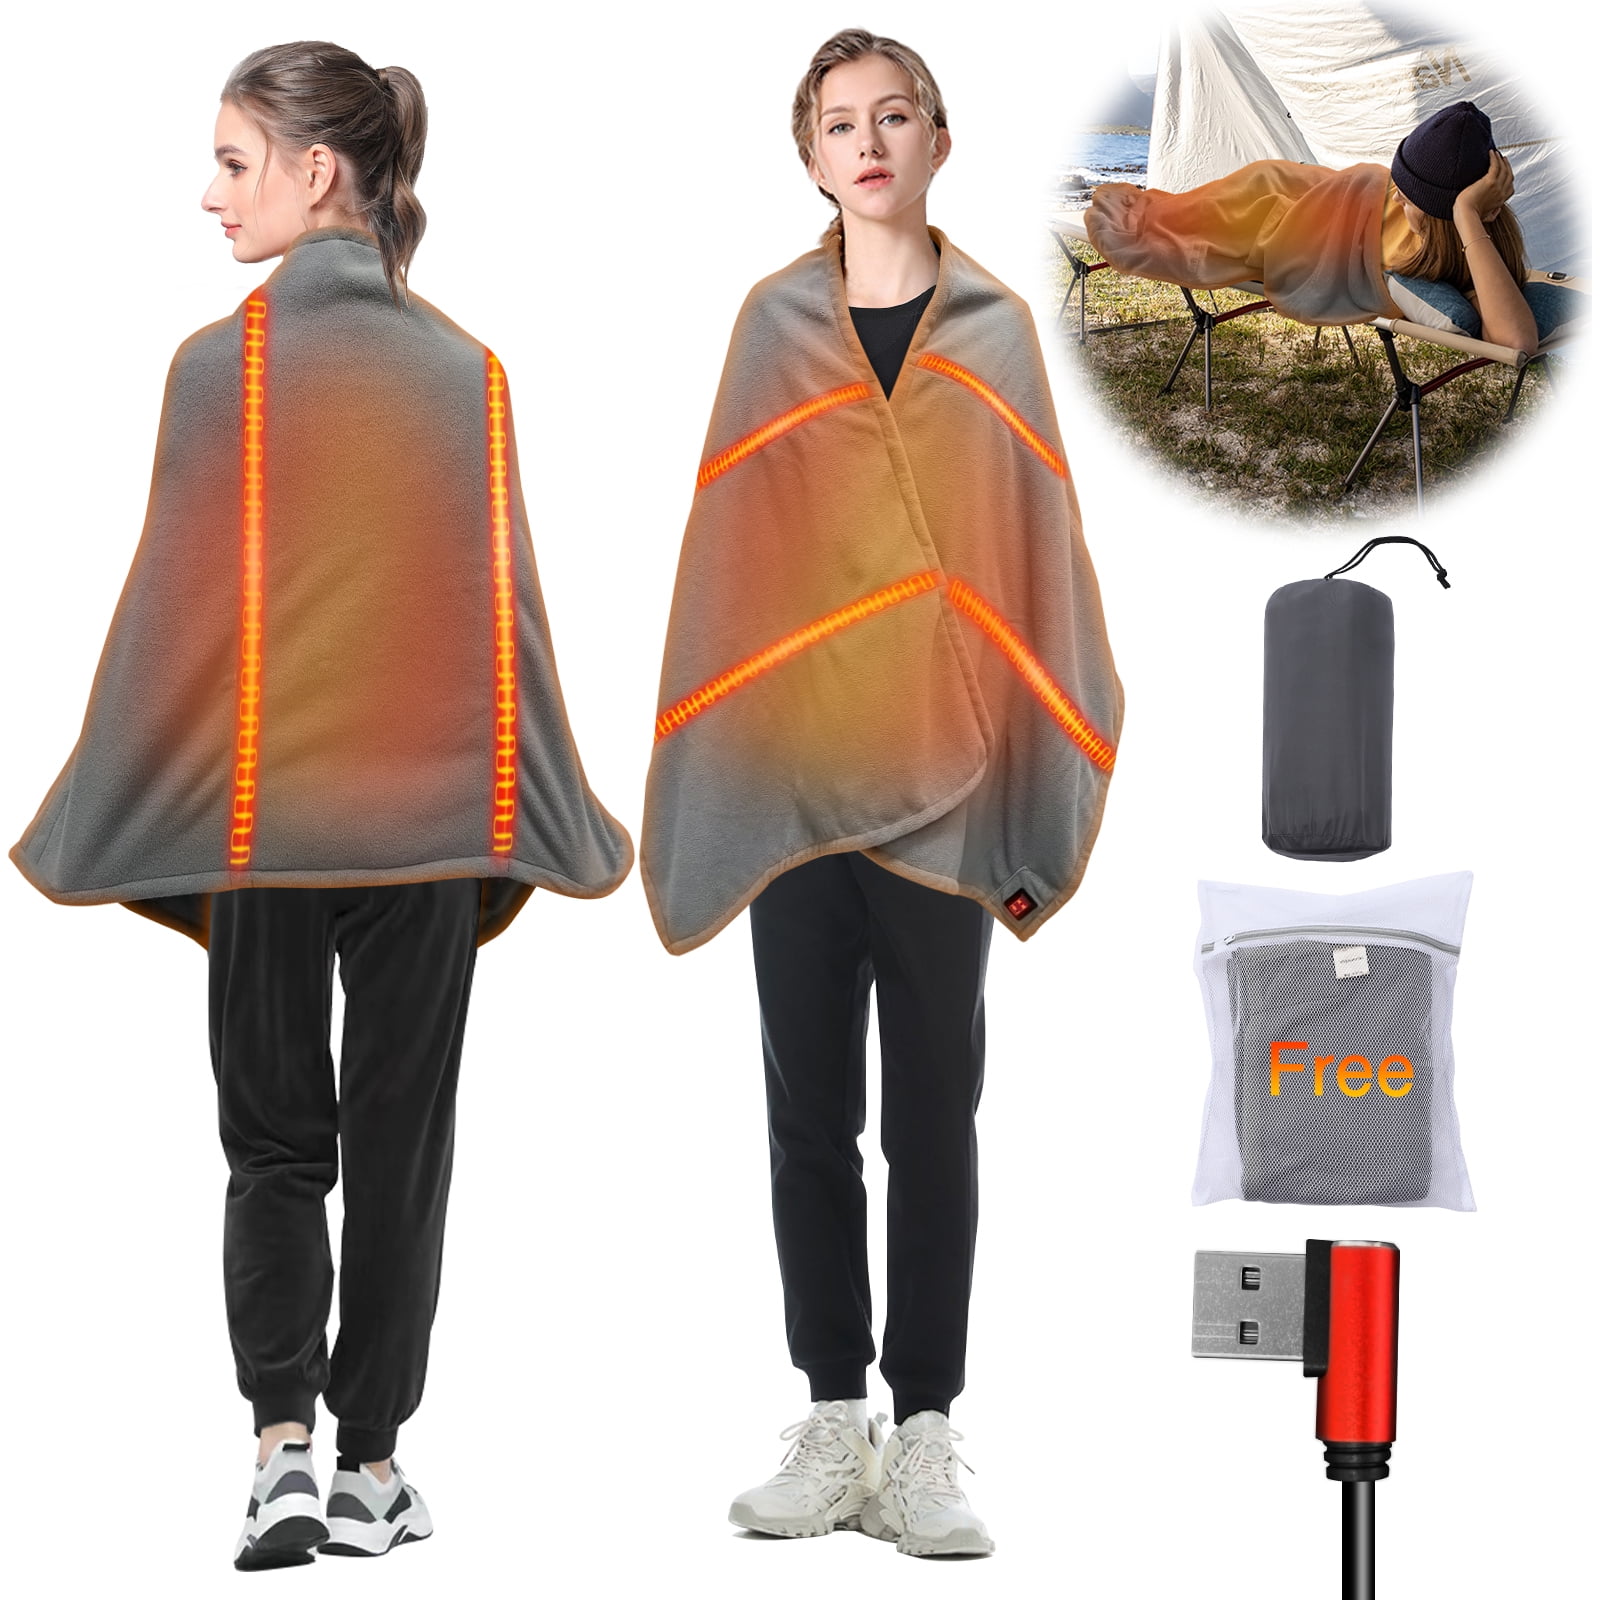 PUIYRBS Portable Heated Blanket for Outdoors Heated Blanket Soft 5V Safety  Electric Usb Blanket Machine Washable for Home Travel Office  (75X120Cm/29.5X47.2Inch) with 120Cm Extension Line 